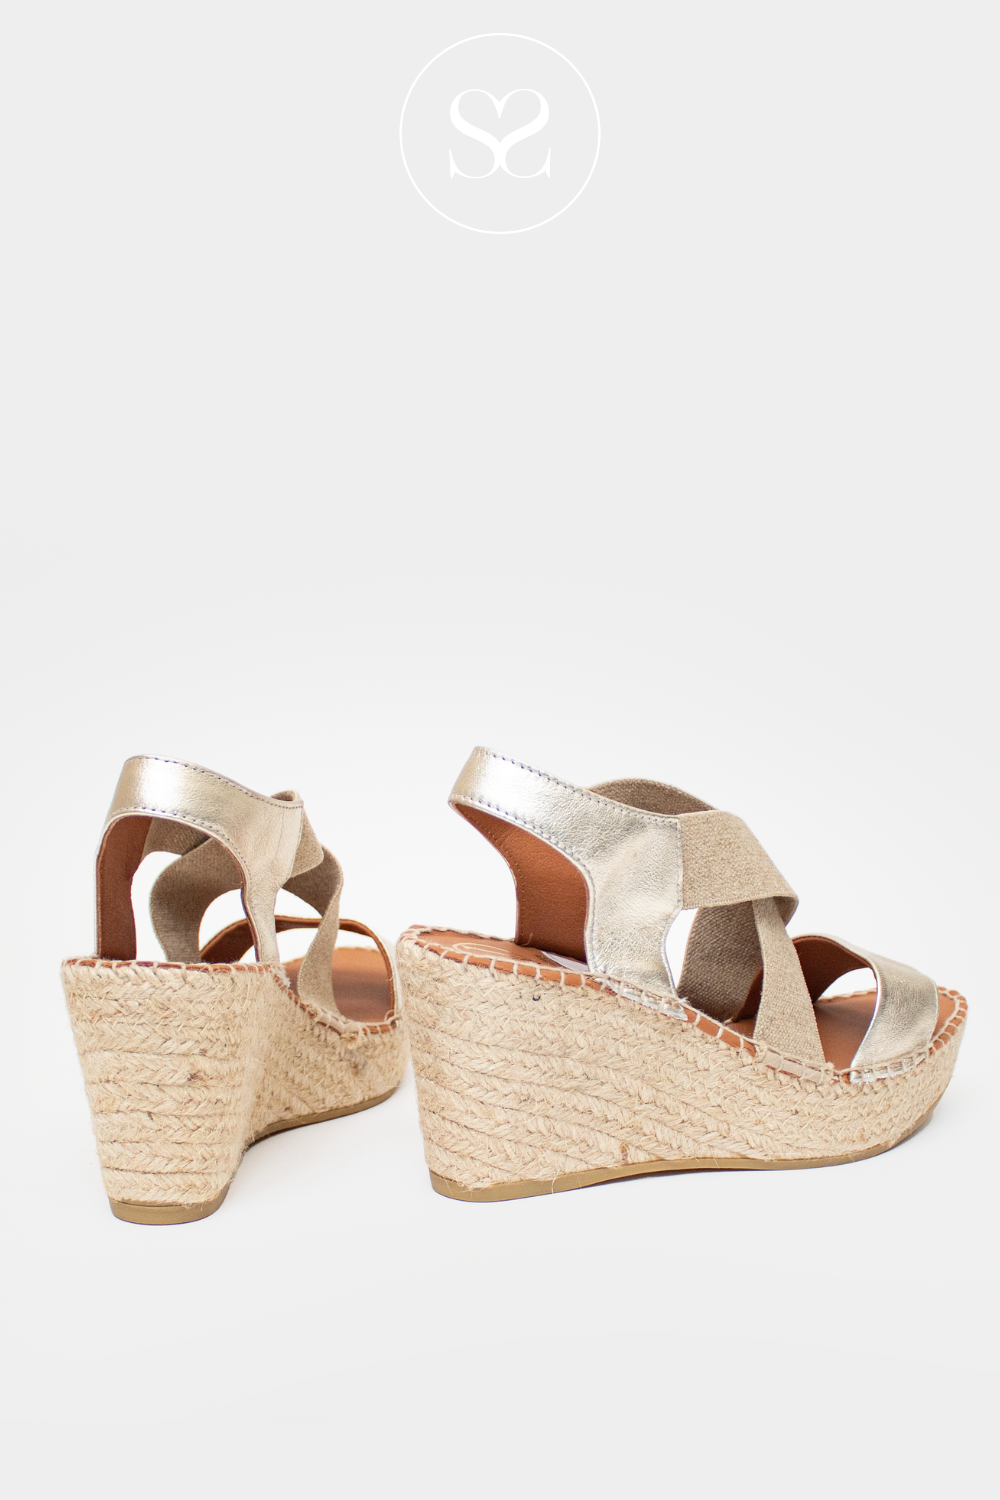 VIGUERA 1900 GOLD WEDGE ESPADRILLE SANDAL WITH ELASTICATED CROSS FRONT